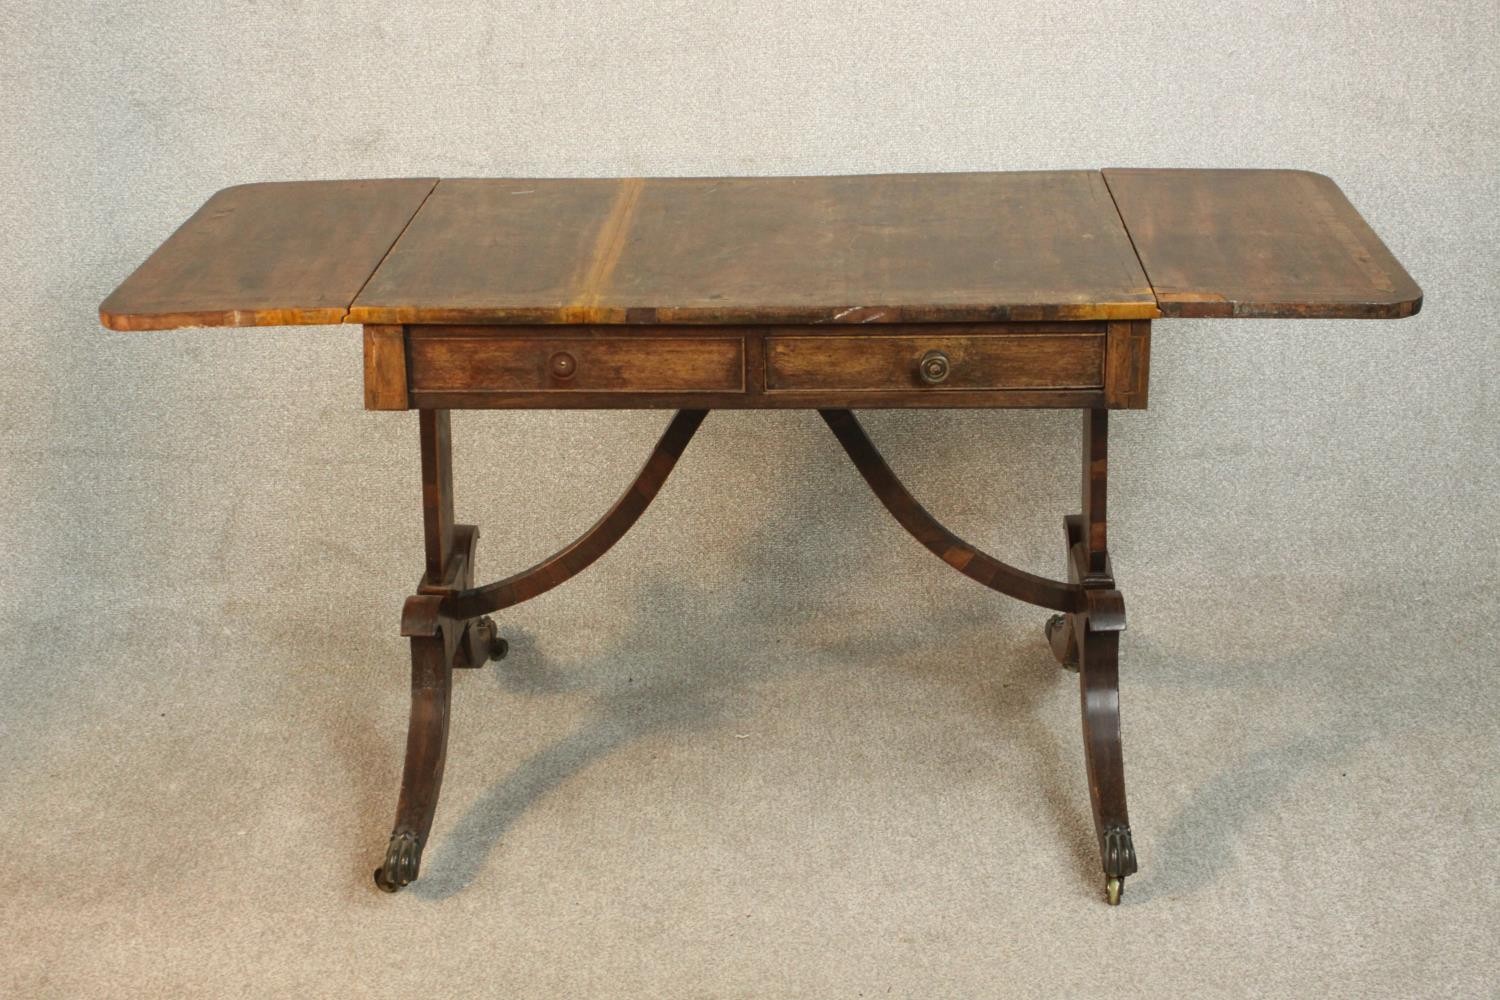 A George III mahogany and crossbanded sofa table with two drop leaves and two drawers, on end - Image 9 of 9